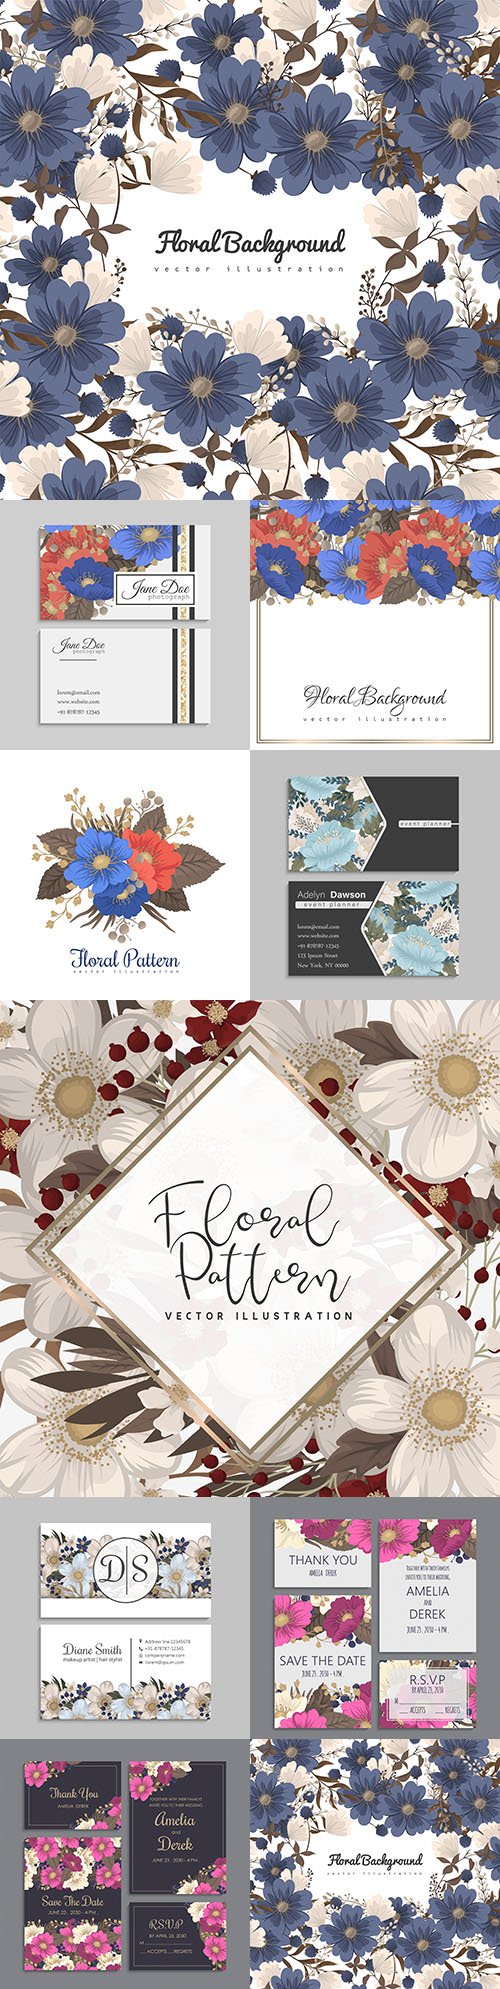 Business cards with flowers and decorative background